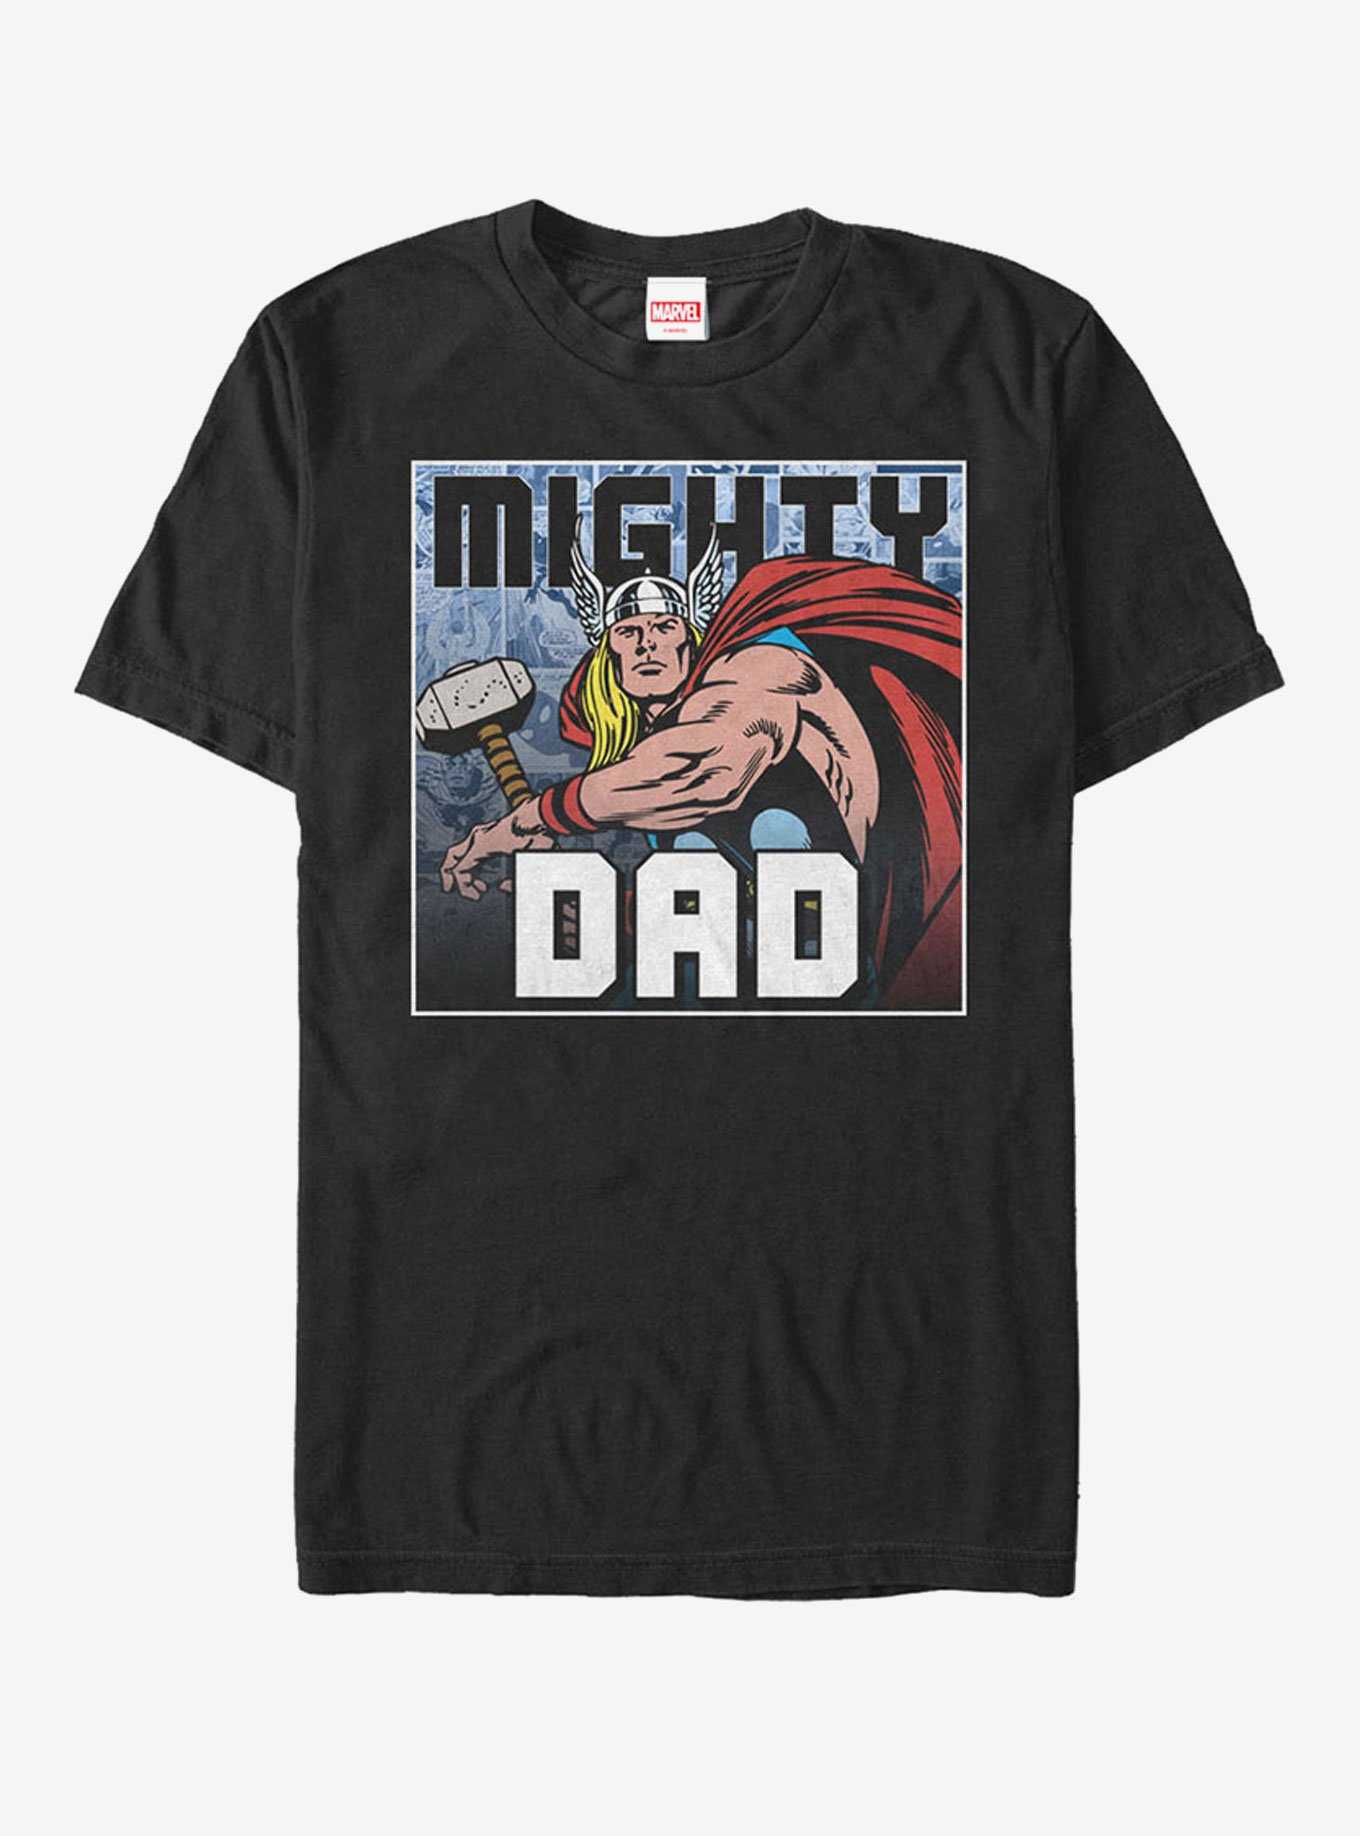 Marvel Thor Mighty Dad T-Shirt, , hi-res